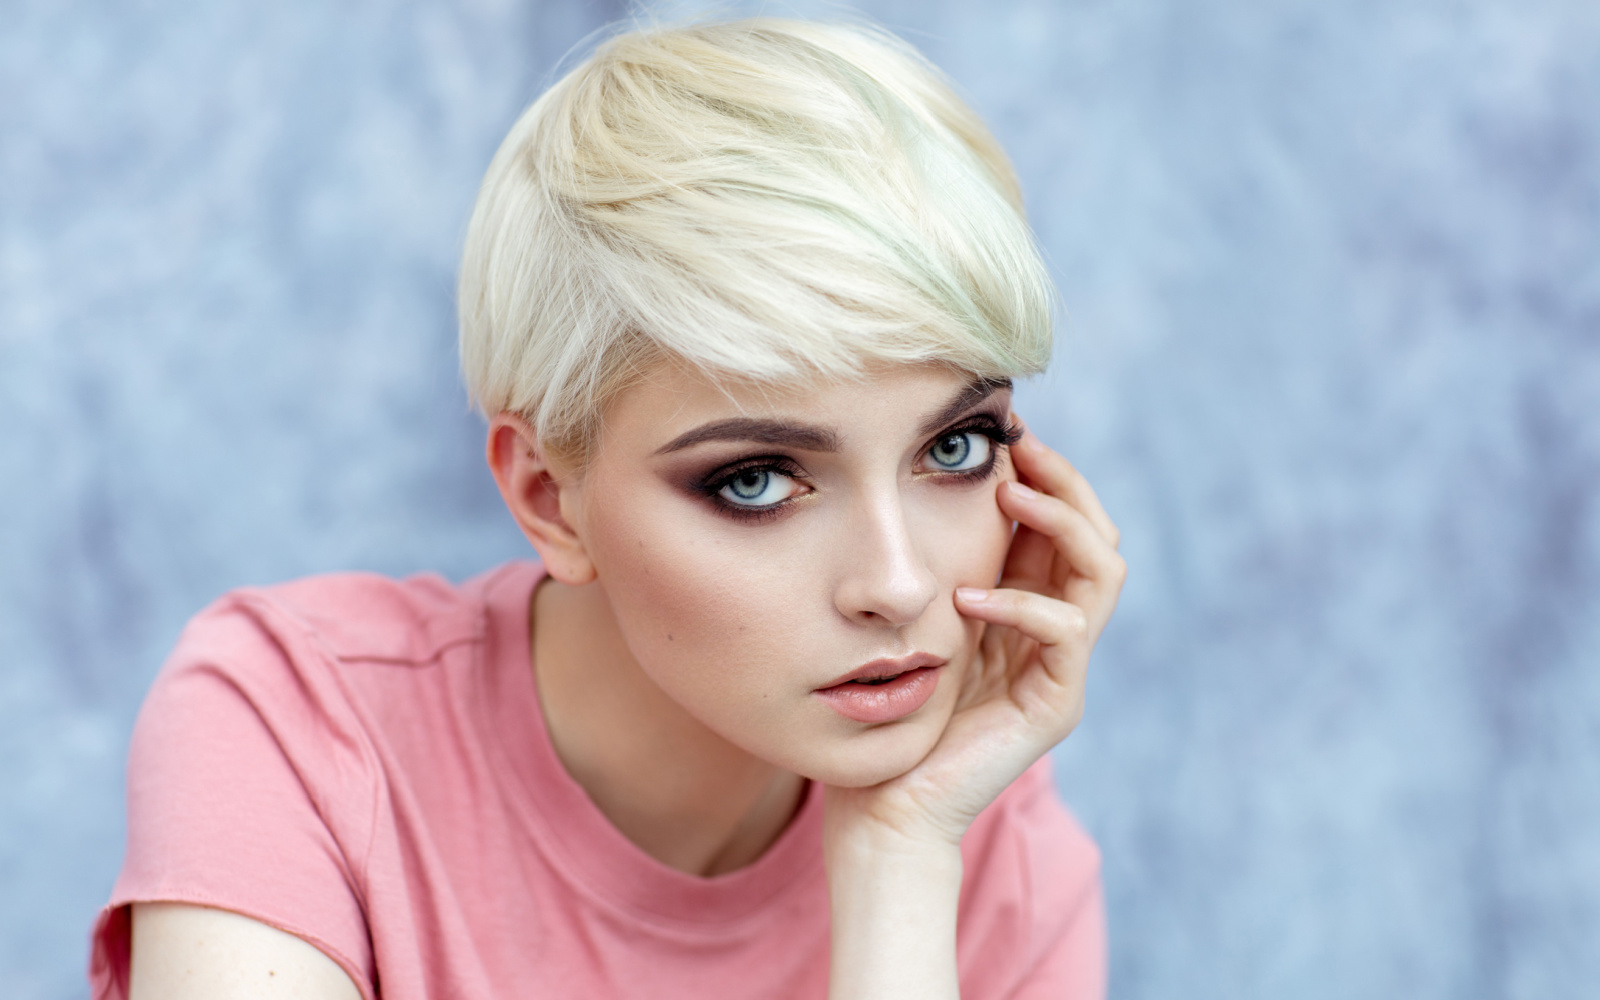 Image of Fierce Buzzed Crop oval face short hairstyle